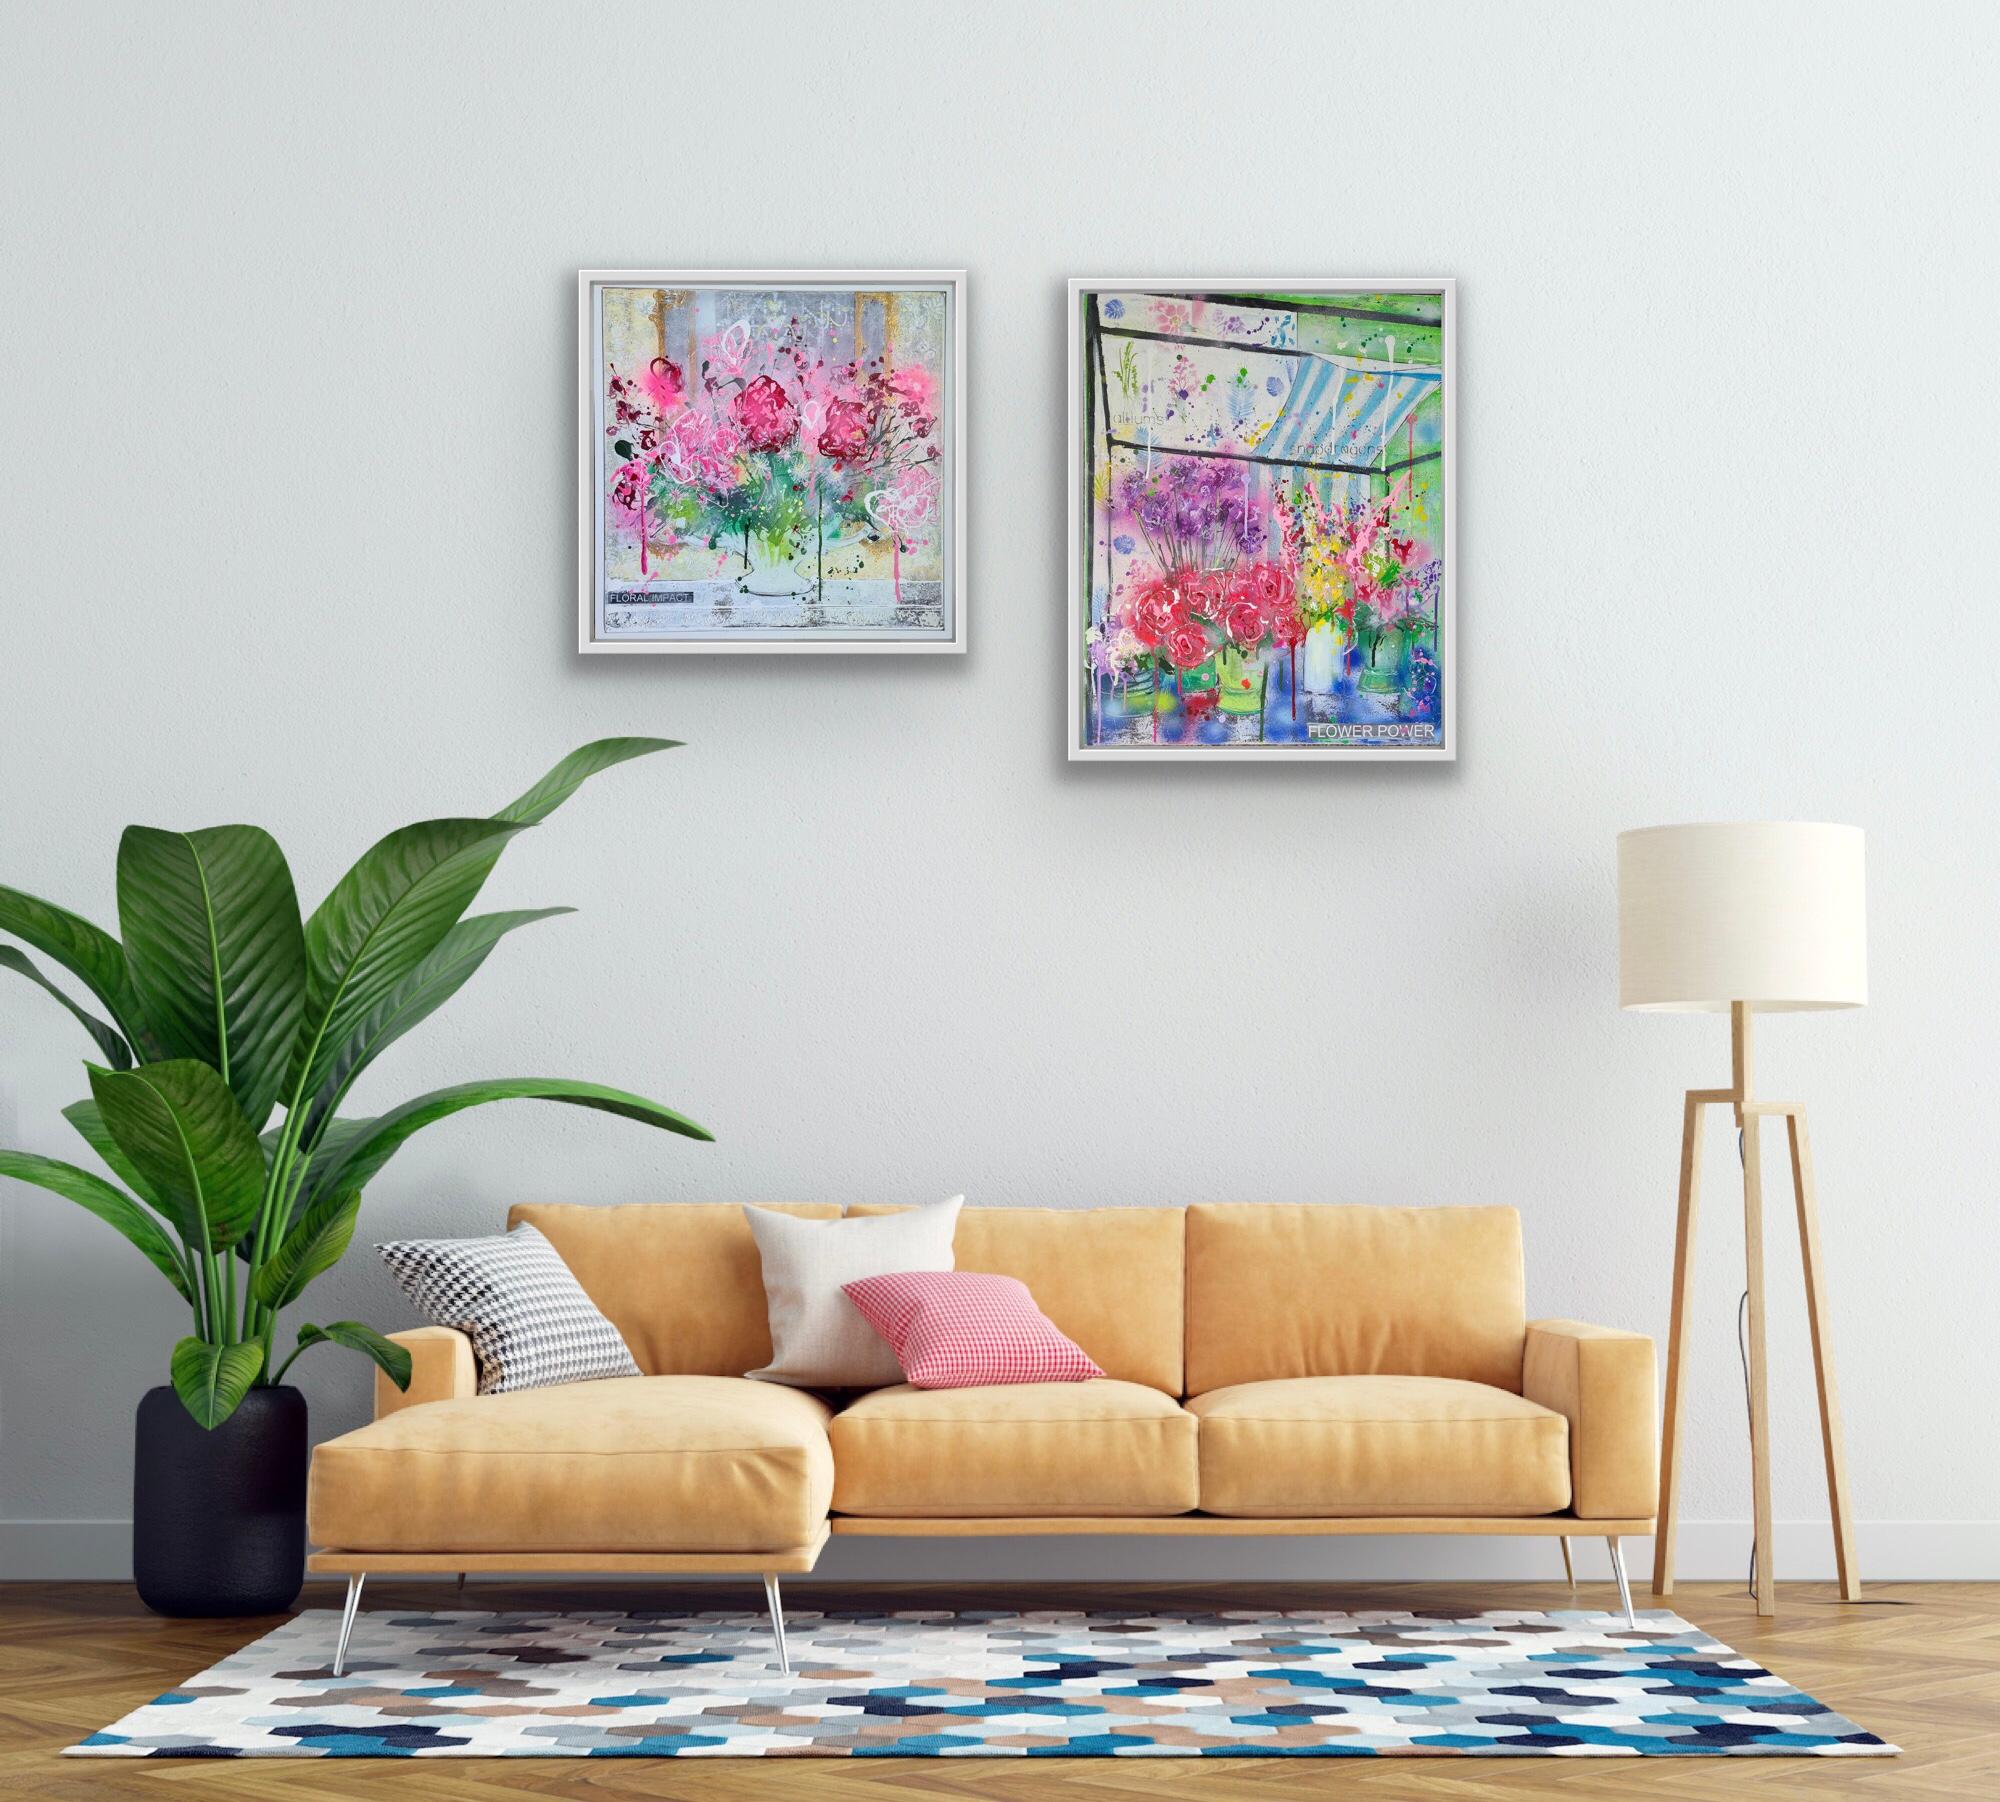 Flower Market and Floral Impact diptych - Painting by Julia Adams